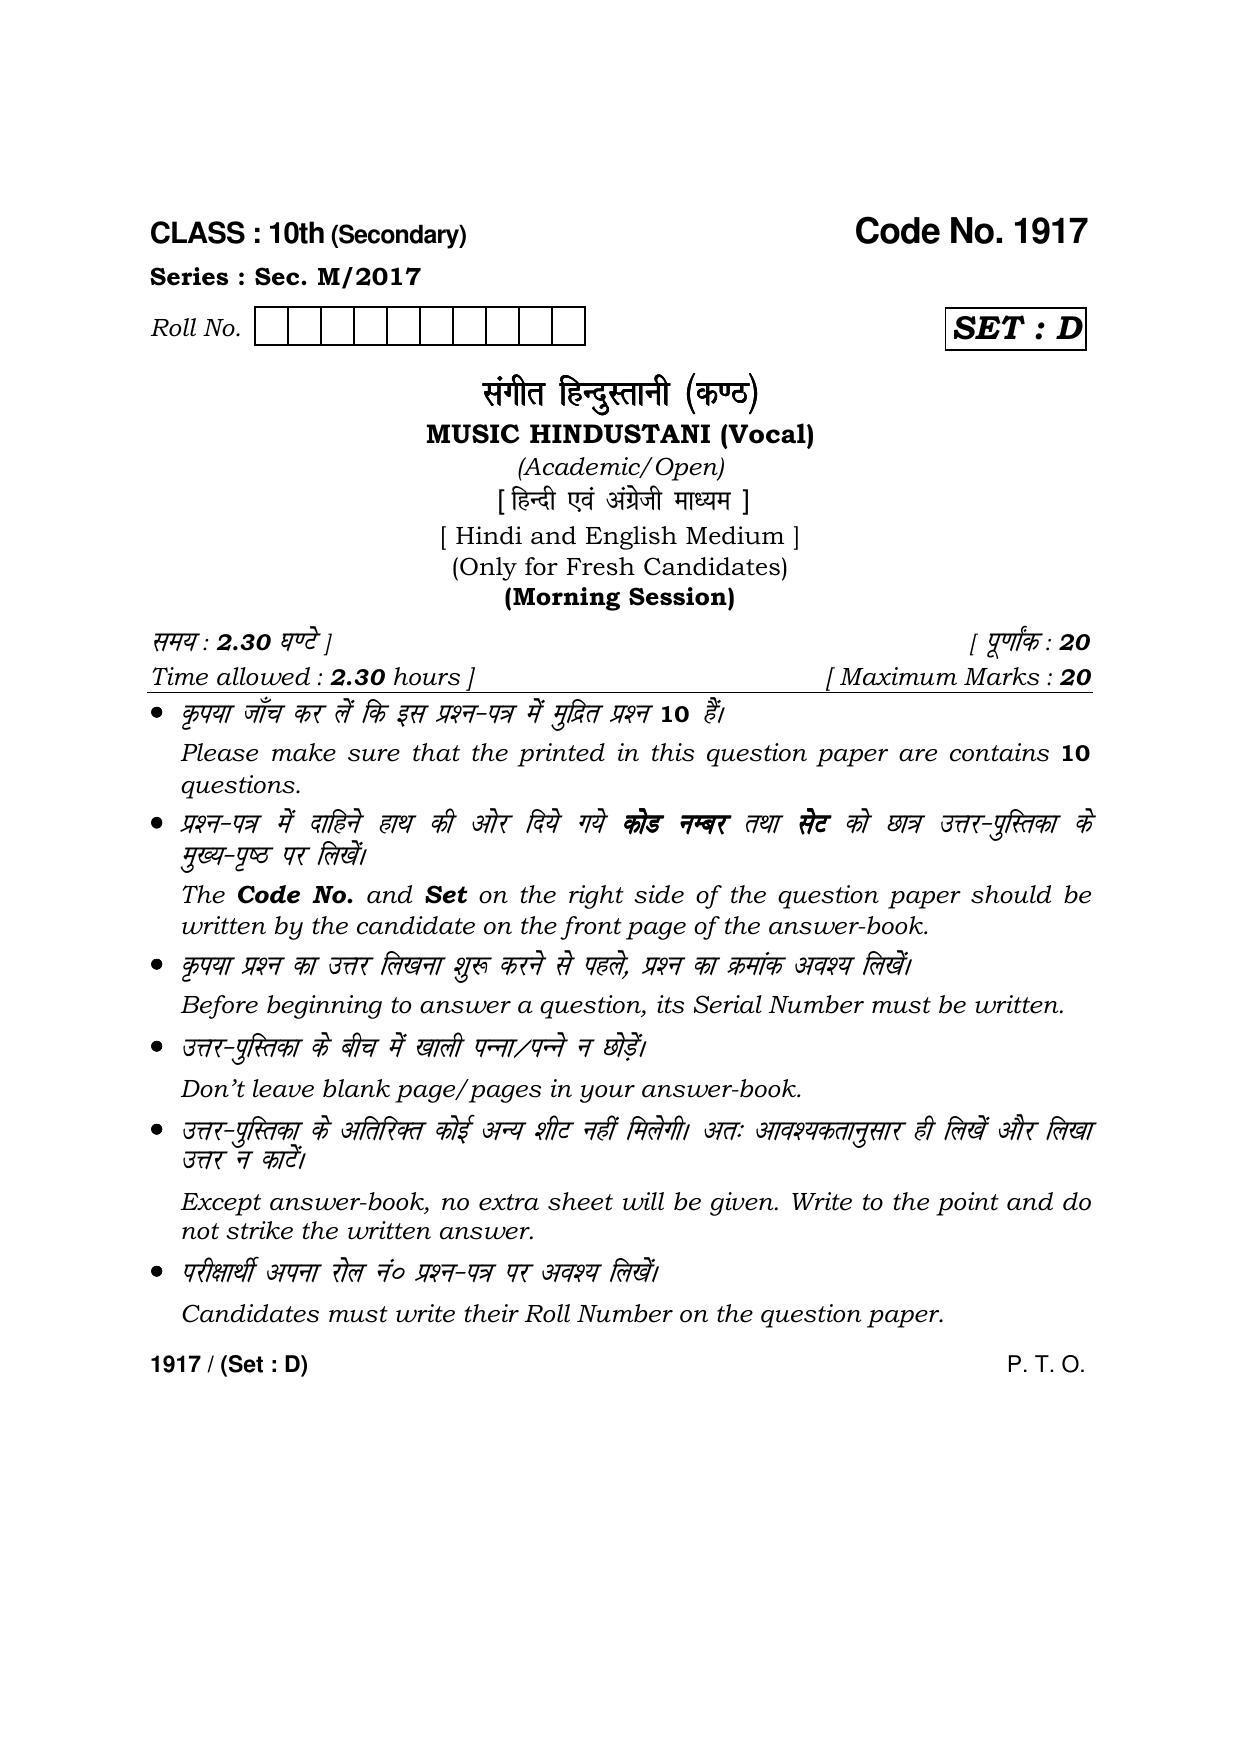 Haryana Board HBSE Class 10 Music Hindustani(Vocal) -D  2017 Question Paper - Page 1